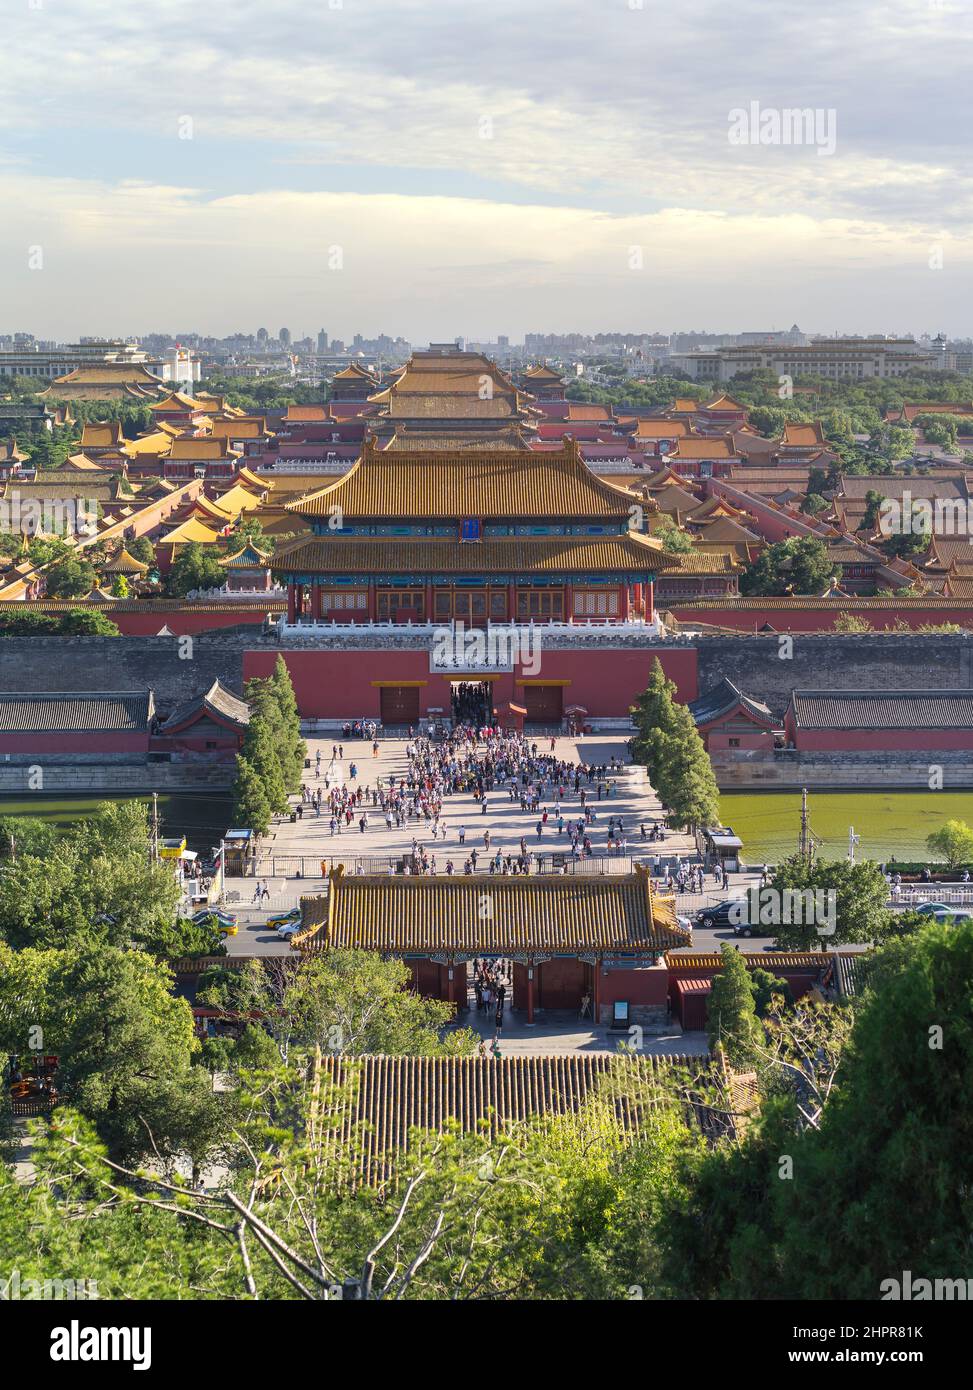 The Forbidden City was the Chinese imperial palace from the Ming Dynasty to the end of the Qing Dynasty. It is located in the middle of Beijing, China Stock Photo